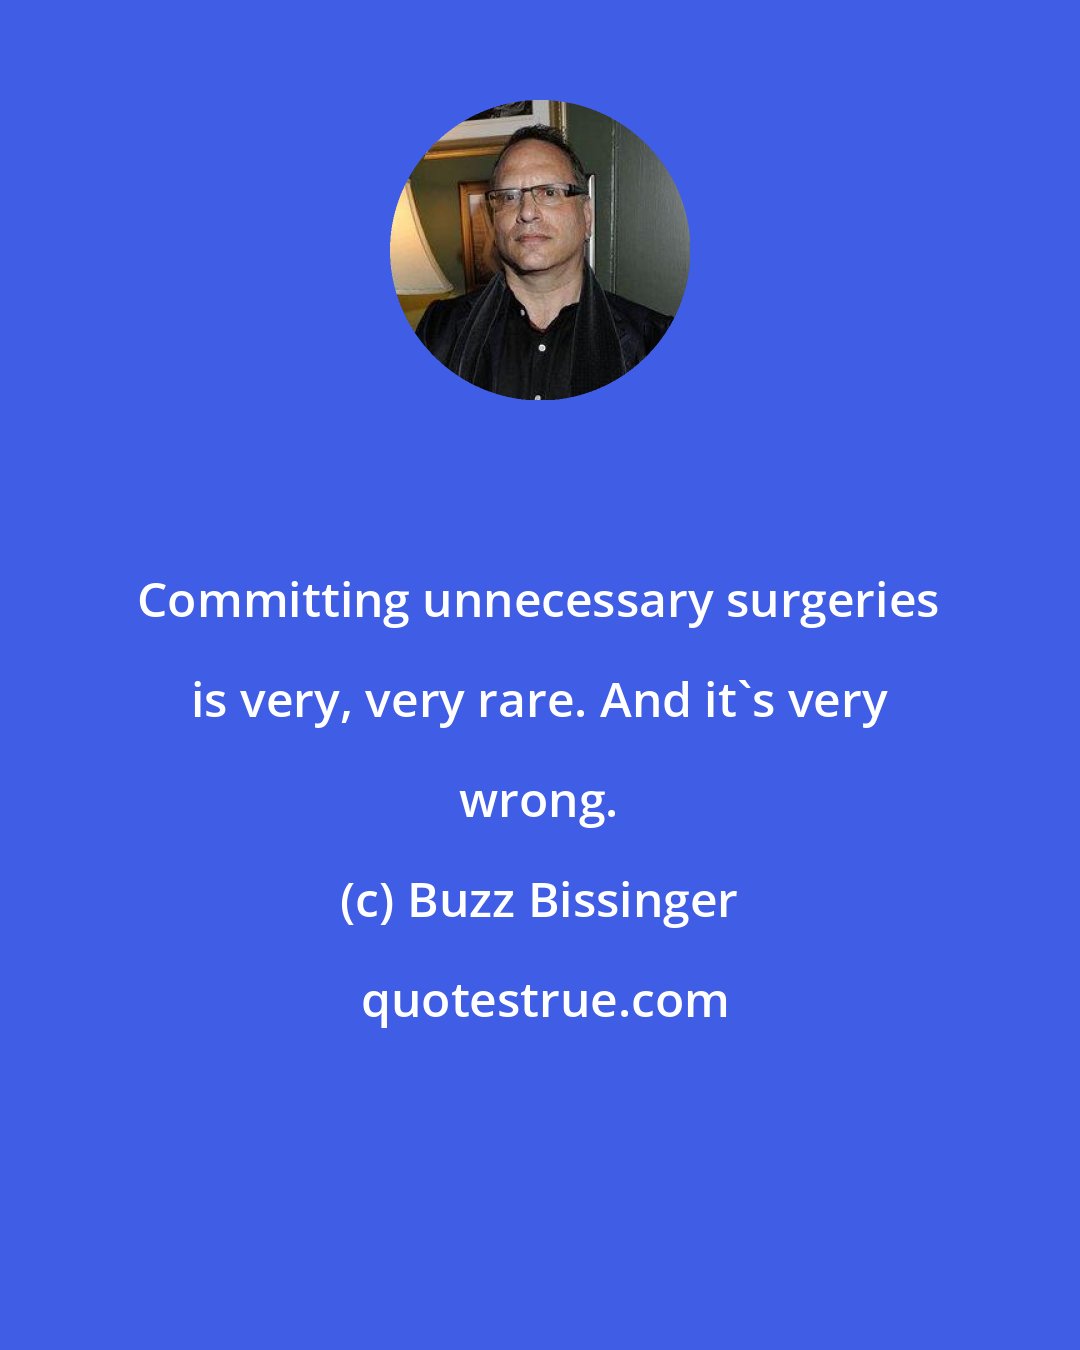 Buzz Bissinger: Committing unnecessary surgeries is very, very rare. And it's very wrong.